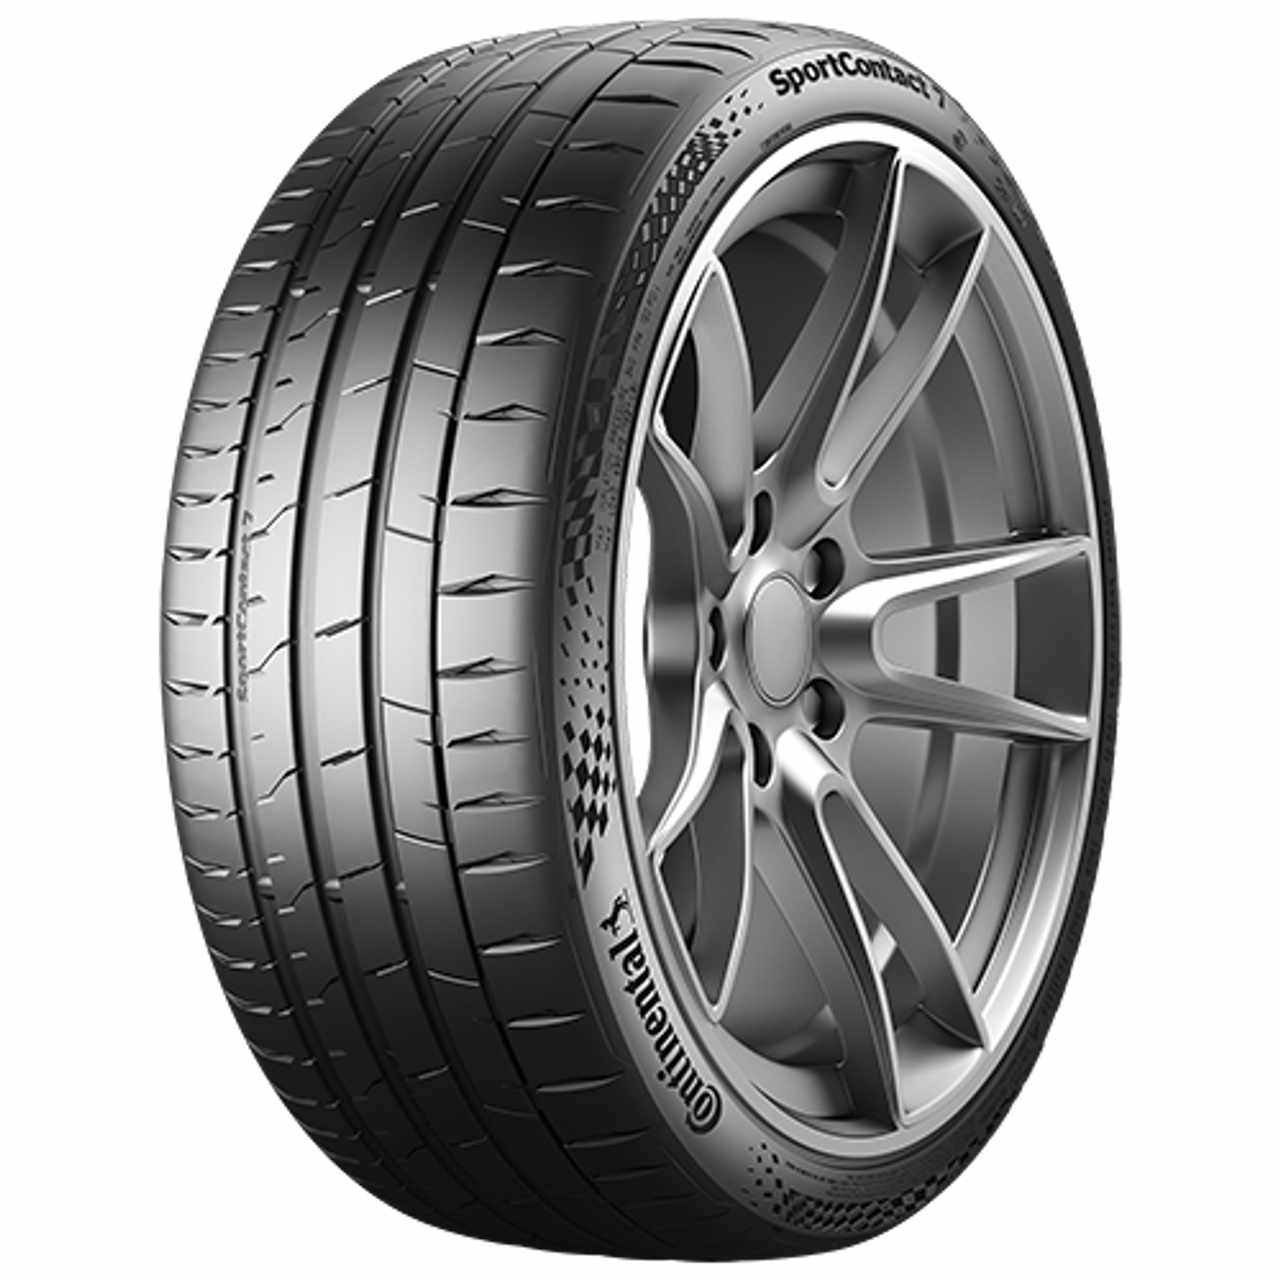 CONTINENTAL SPORTCONTACT 7 (MGT) 265/40ZR21 101(Y) FR BSW